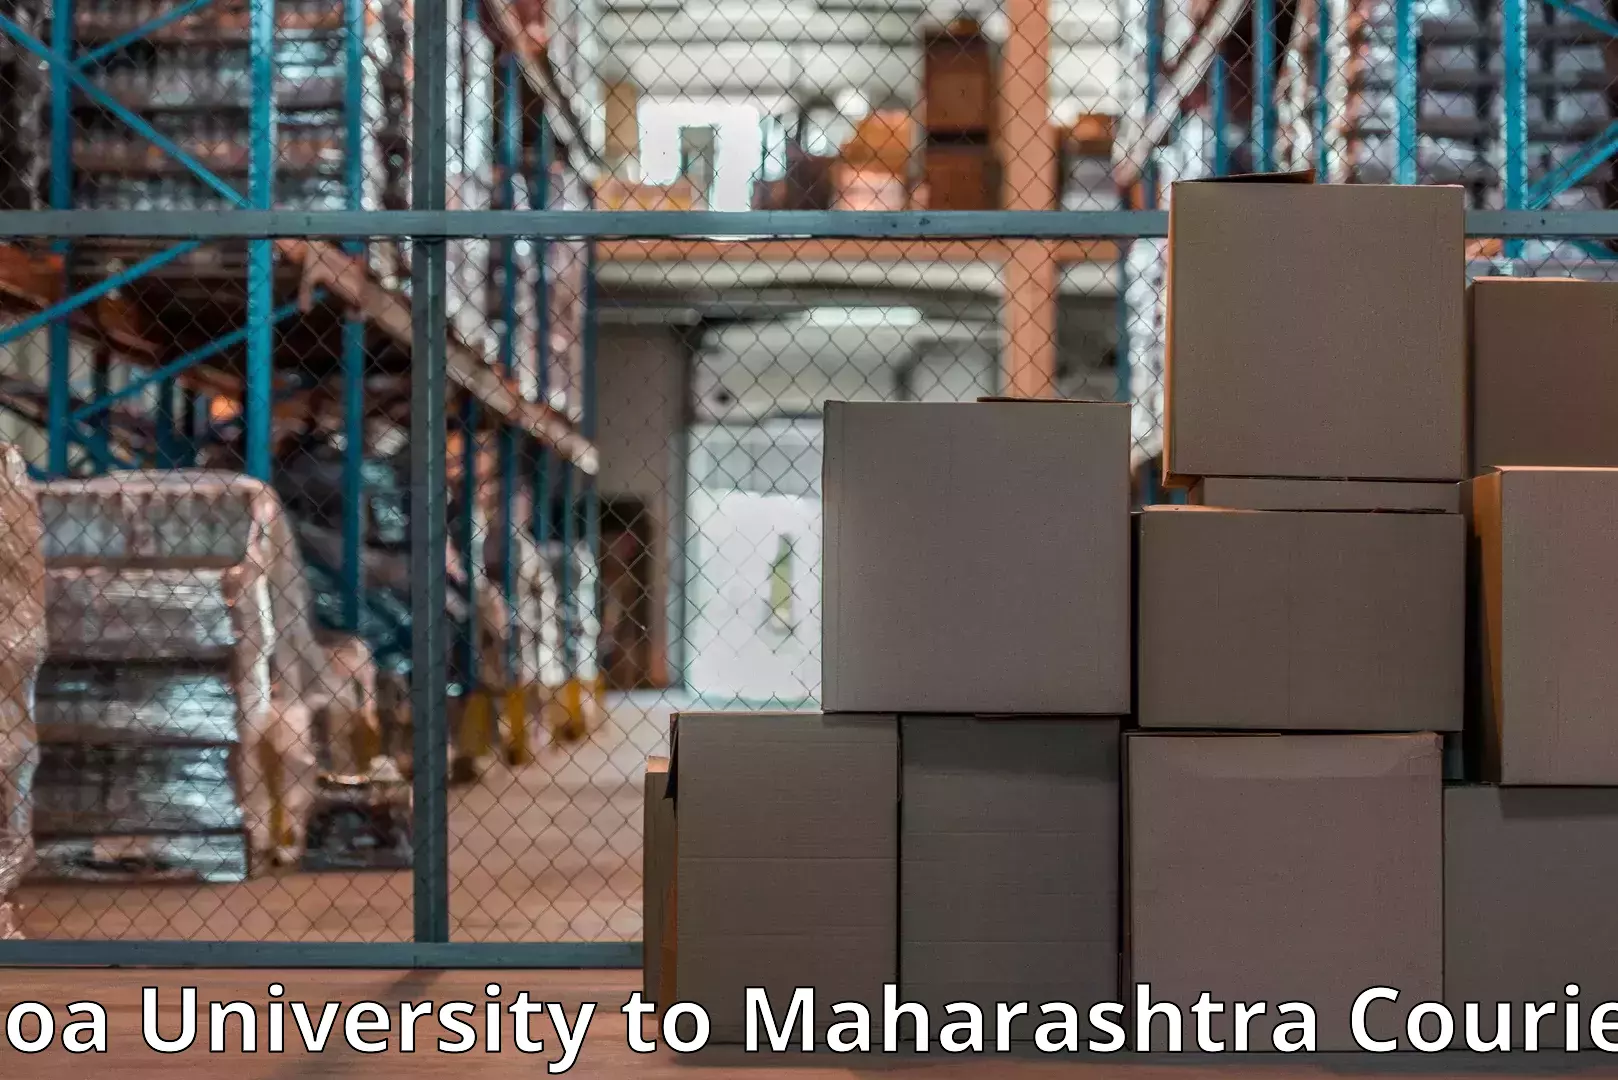 Premium moving services in Goa University to DY Patil Vidyapeeth Pune